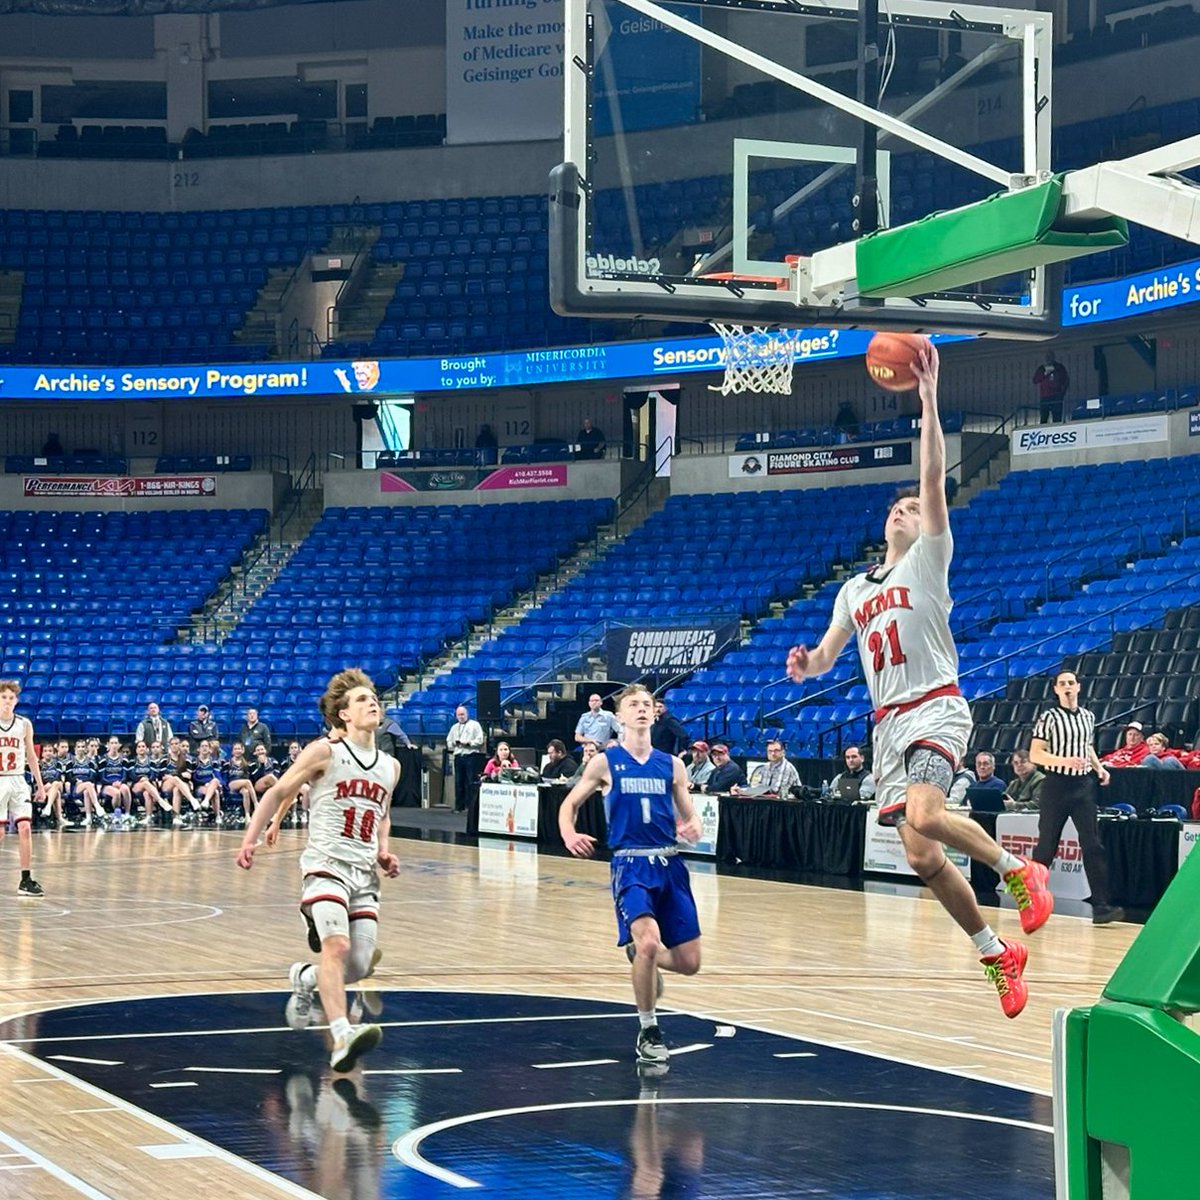 It was another high-energy night of peak athleticism inside the Mohegan Sun Arena, where eight more #NEPA teams relentlessly battled for glory on the second day of the #PIAA District II High School #Basketball Championships.